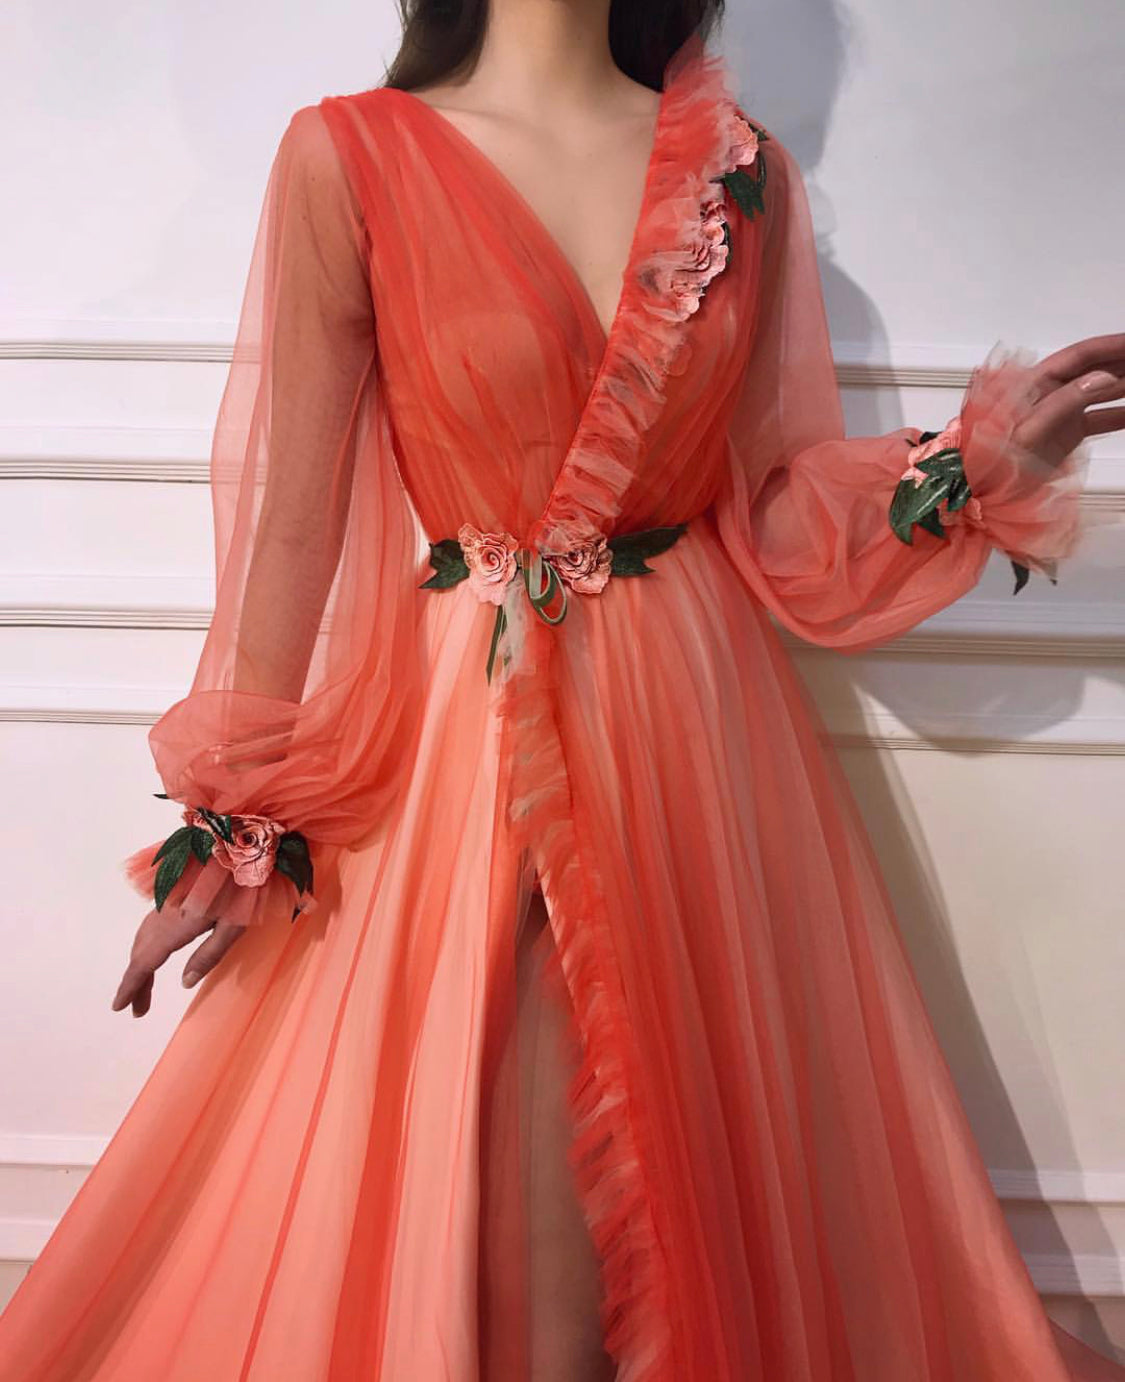 Orange A-Line dress with long sleeves and embroidery